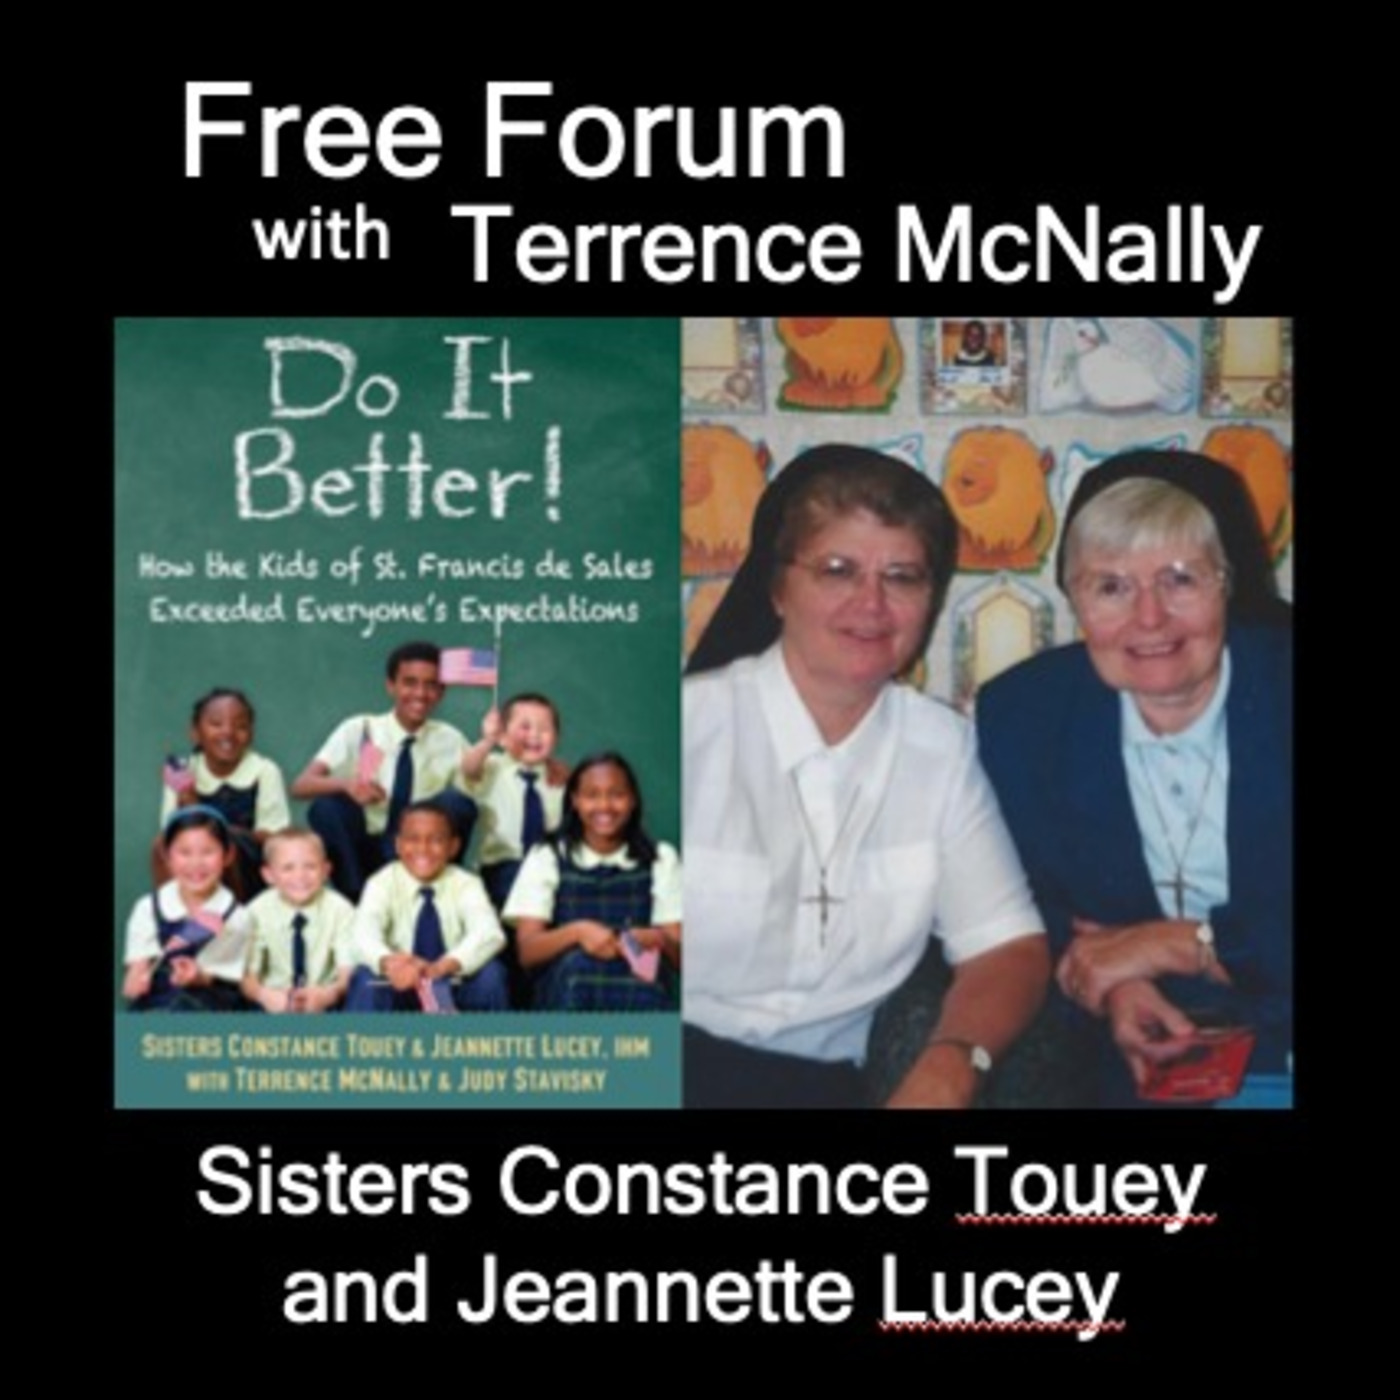 Episode 489: NEW-Sisters Constance Touey & Jeannette Lucey - DO IT BETTER: How the Kids of St. Francis de Sales Exceeded Everyone’s Expectations